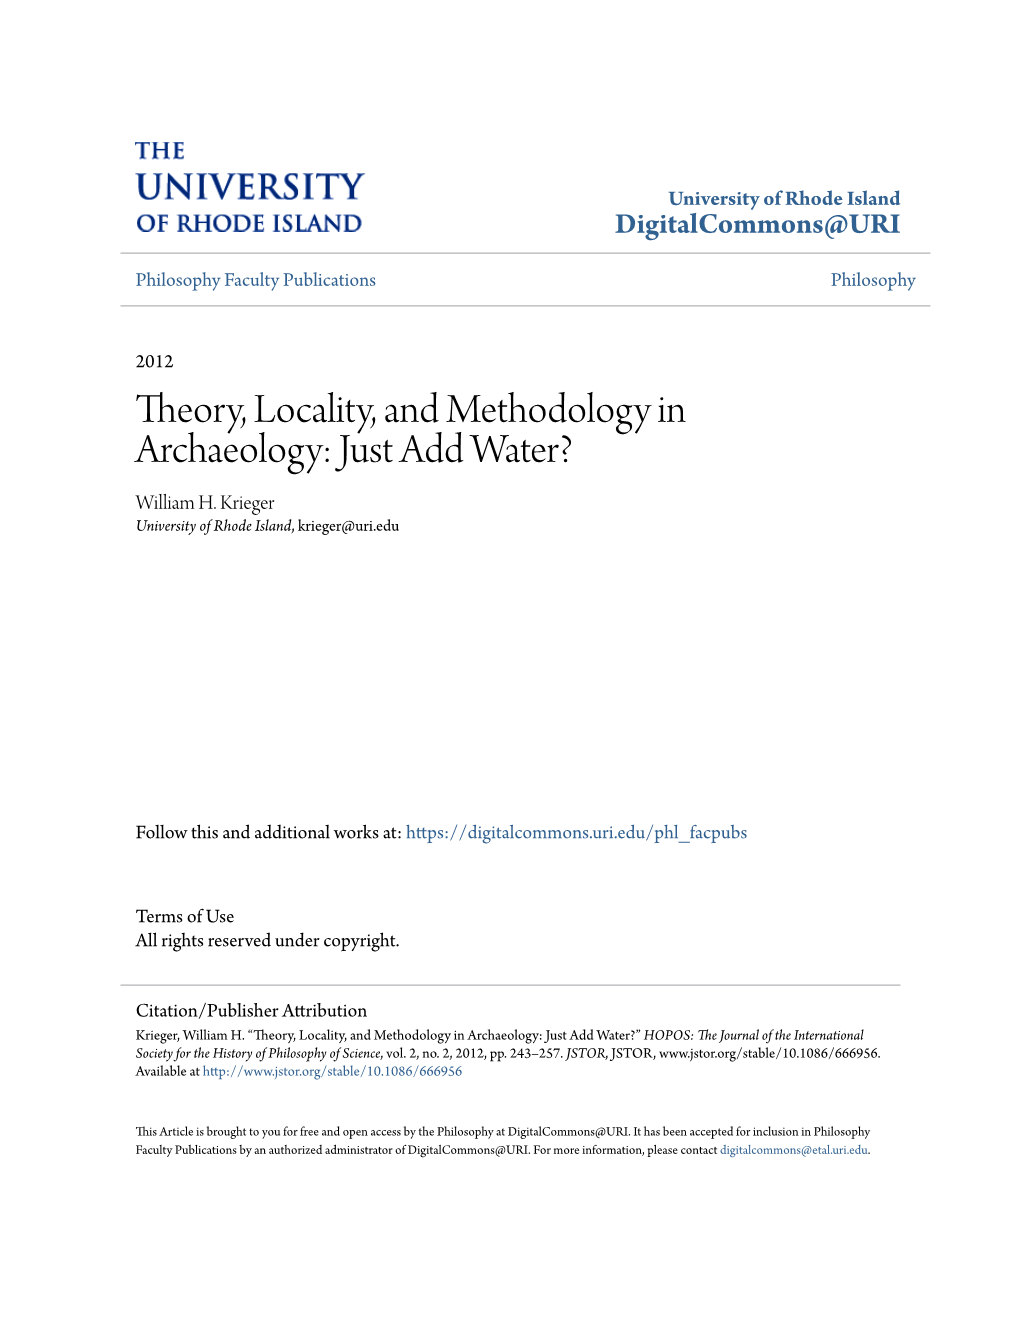 Theory, Locality, and Methodology in Archaeology: Just Add Water? William H